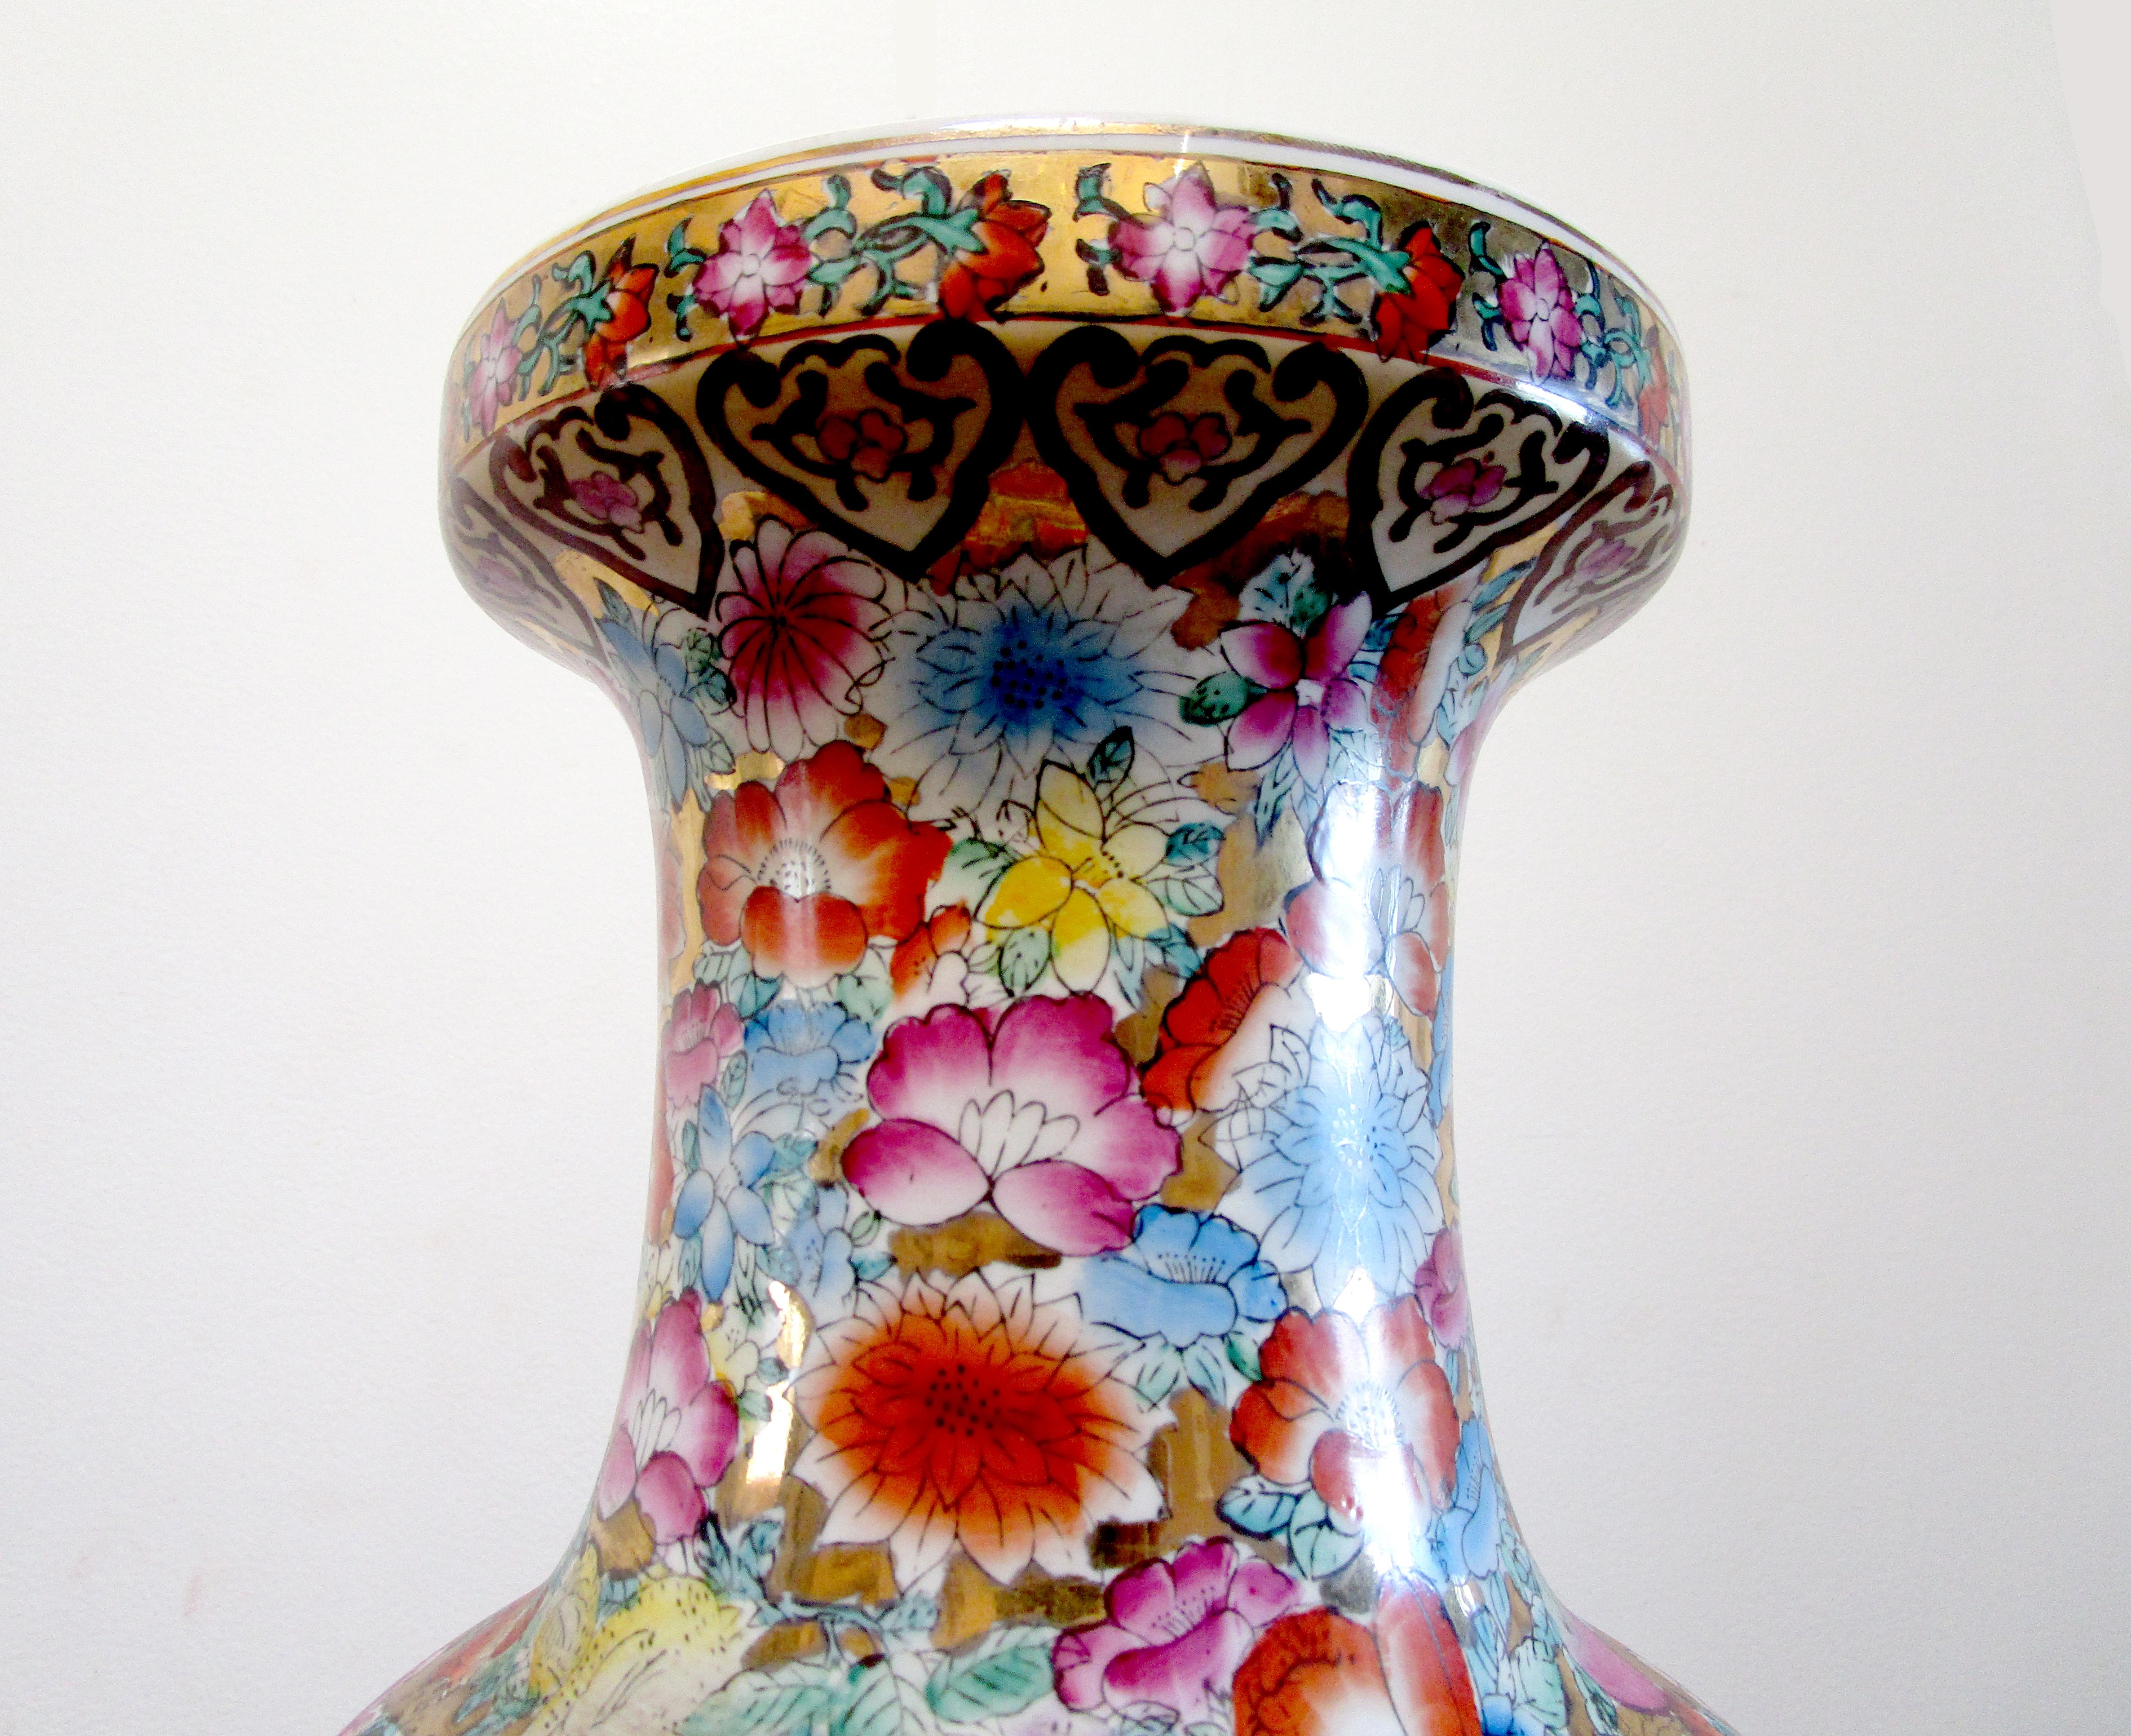 Hand-Painted 1920s Mille Fiori Chinese Export Parcel Gilt Monumental Rouleau Vase For Sale